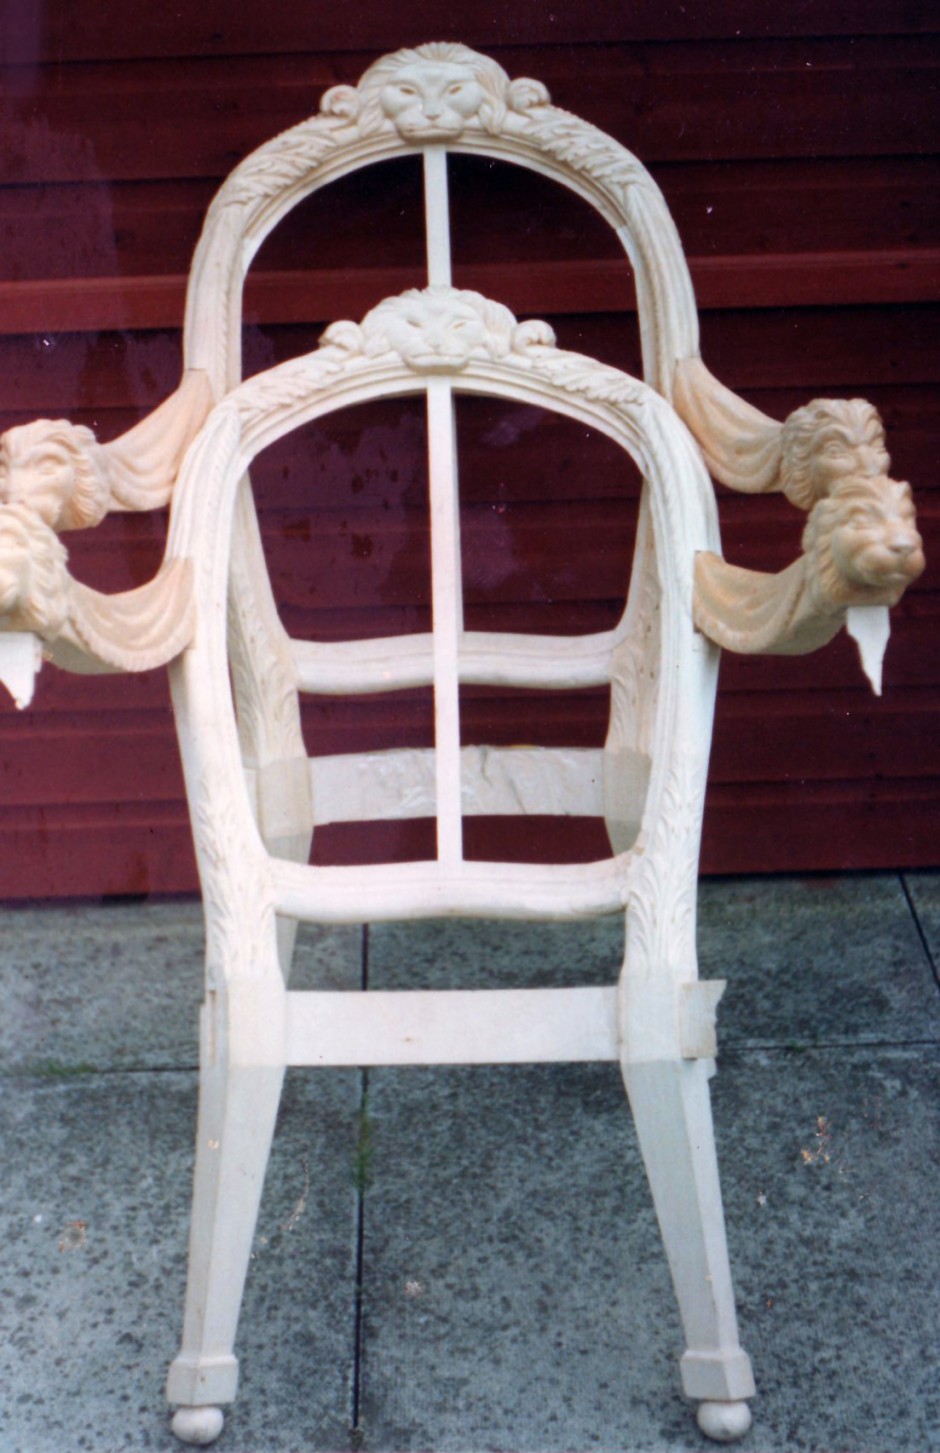 Work in progress - Chair backs carved. - elton john chairs wooden carved chairs famour